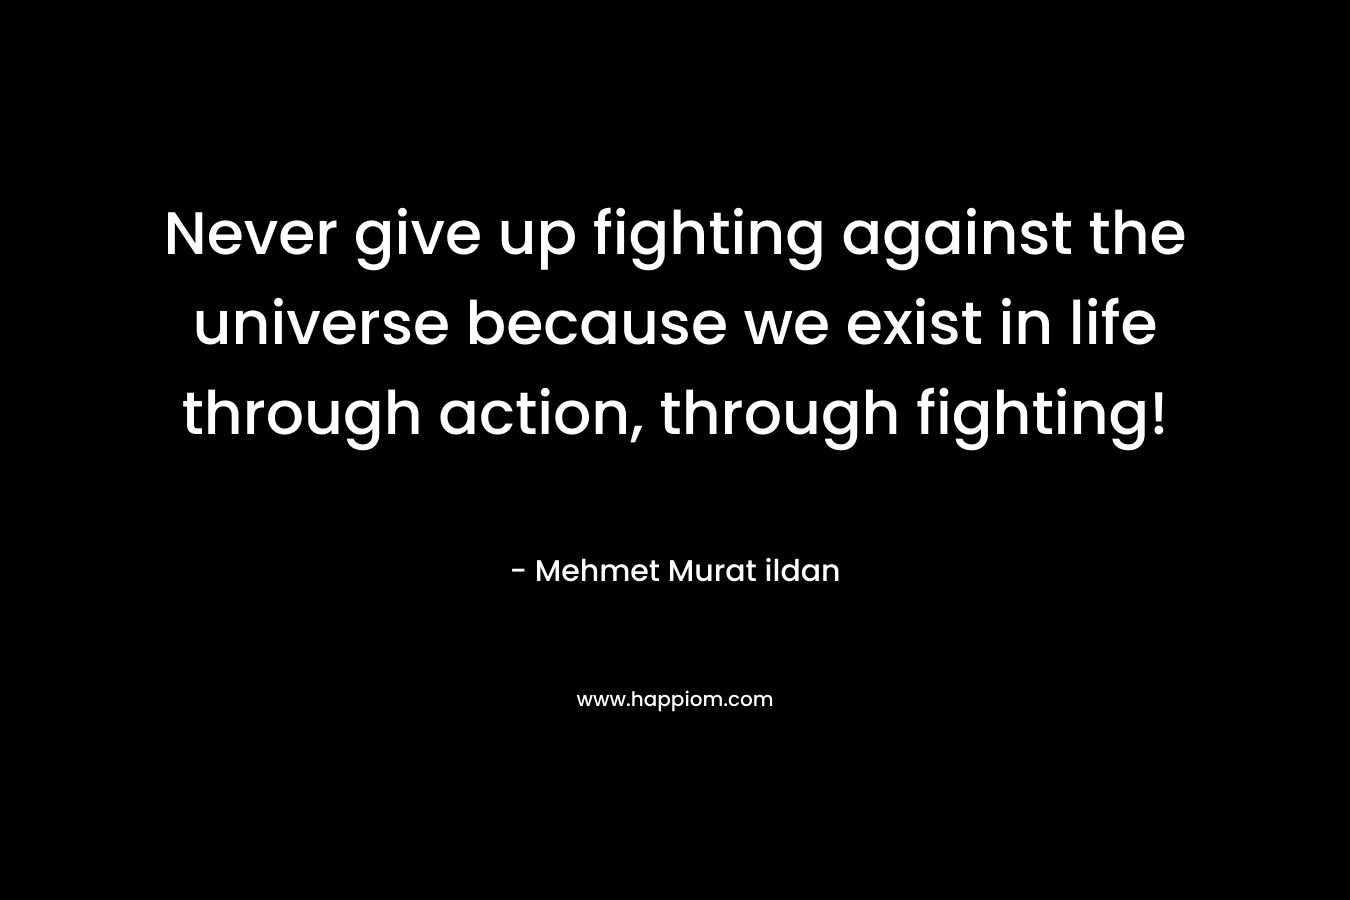 Never give up fighting against the universe because we exist in life through action, through fighting!